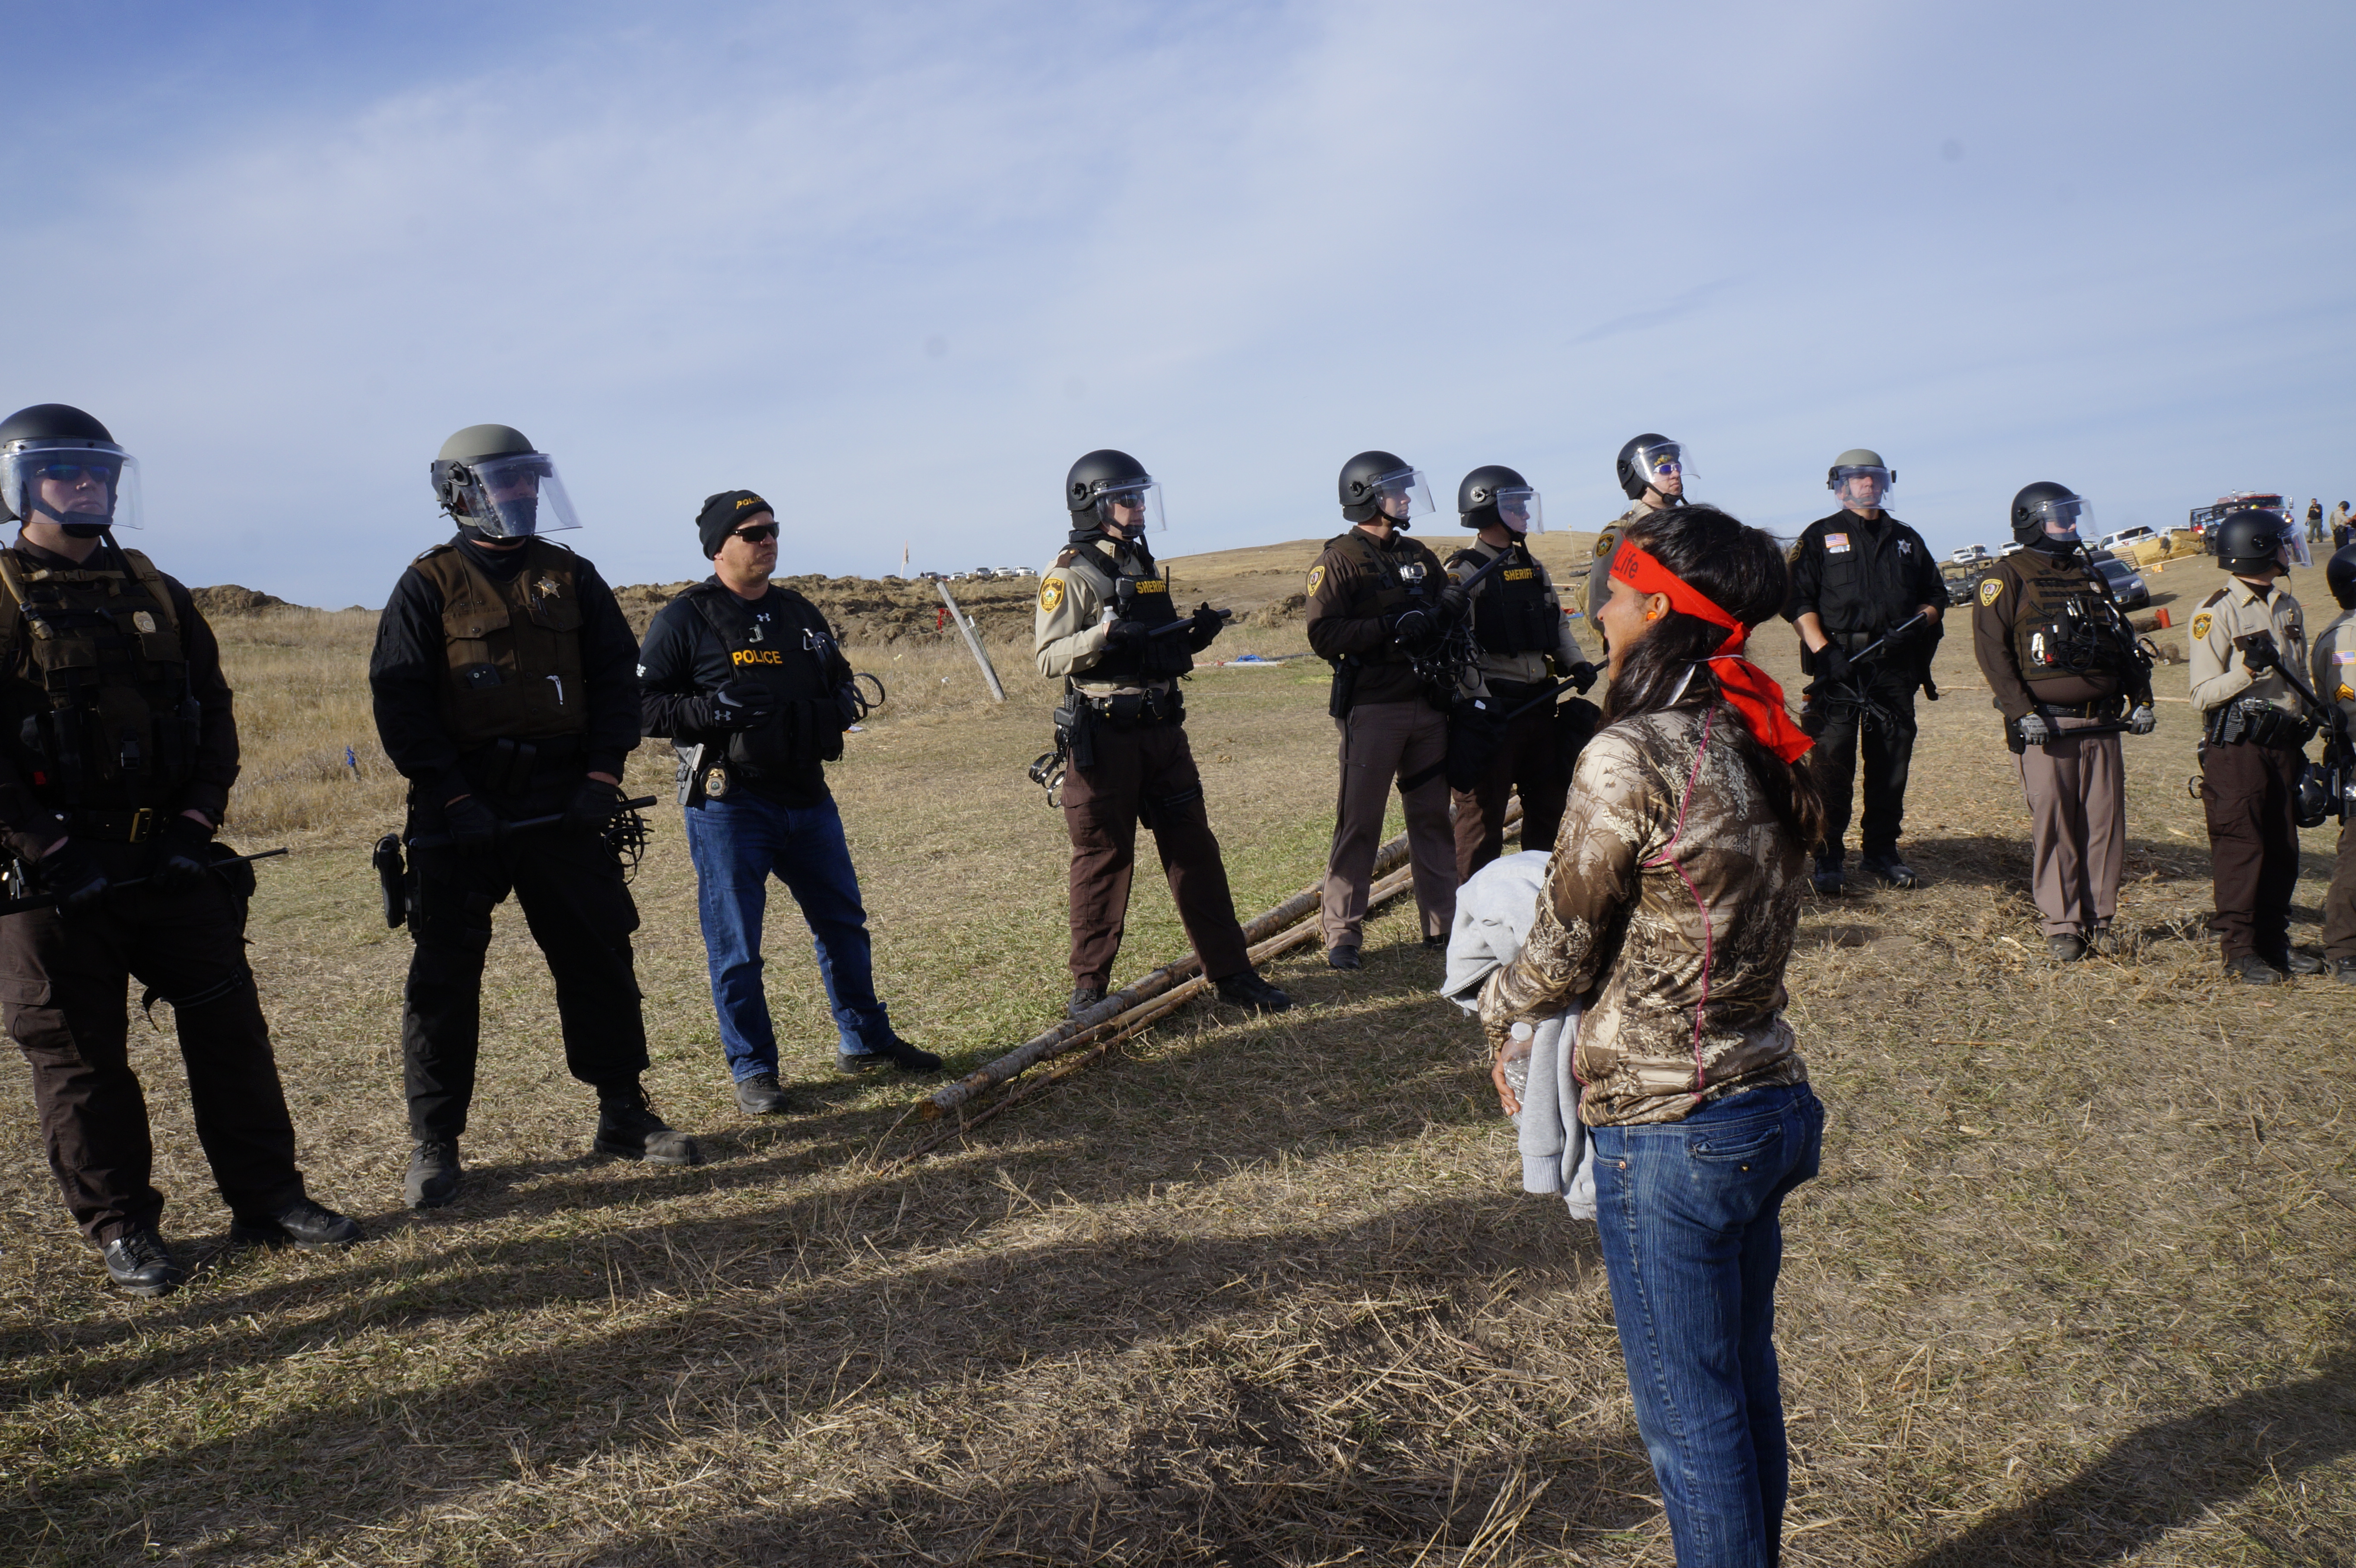 A water protector stares down police off highway 134, October 27. (Photo: Derrick Broze)